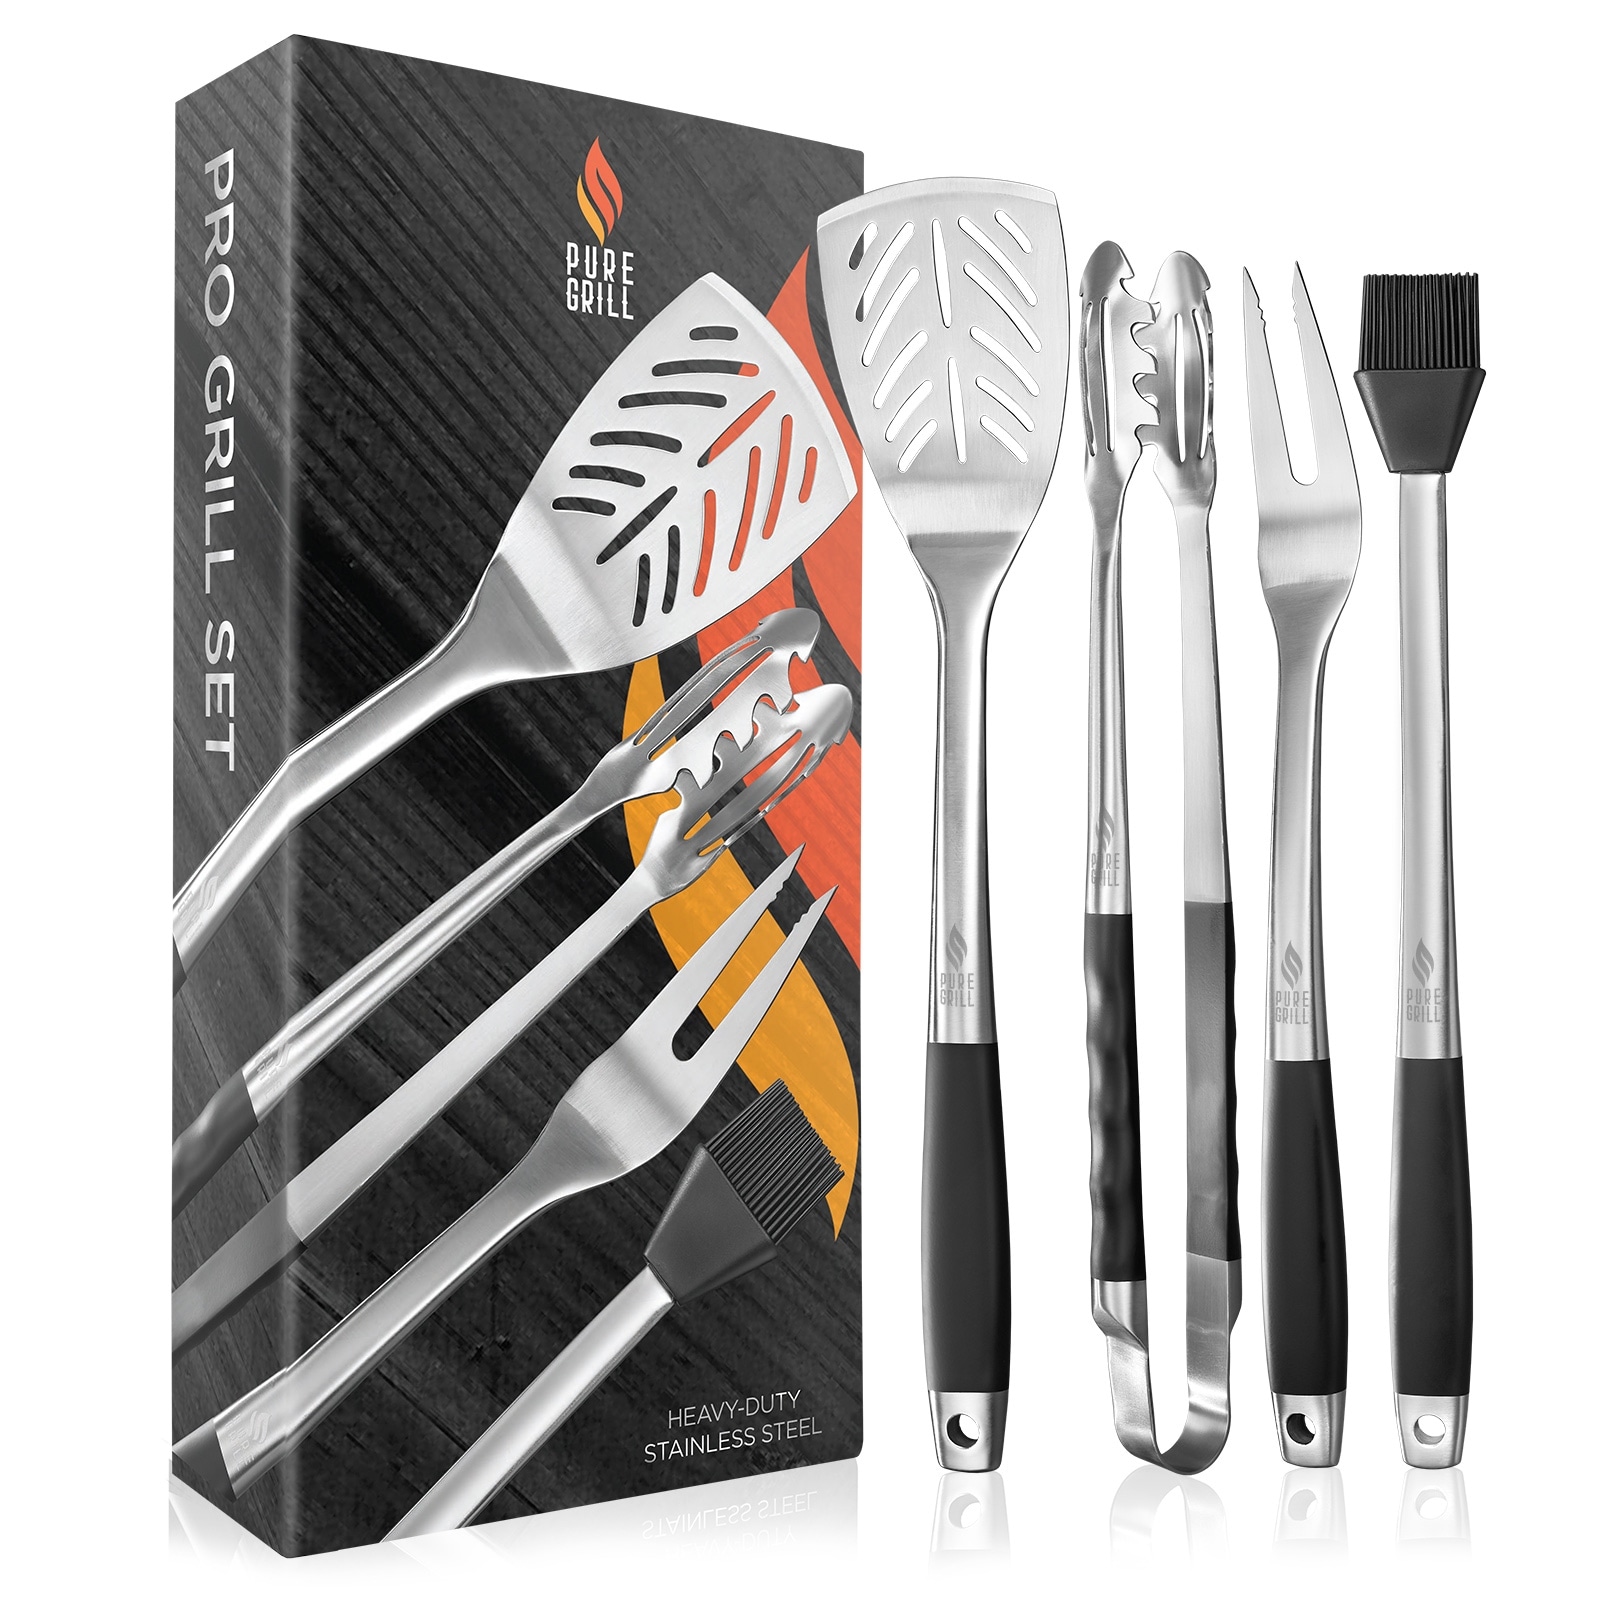 https://ak1.ostkcdn.com/images/products/is/images/direct/67eb0c678b9144743f451706ad50cab324be4f6c/4pc-BBQ-Tool-Utensil-Set%2C-Stainless-Steel-by-Pure-Grill.jpg